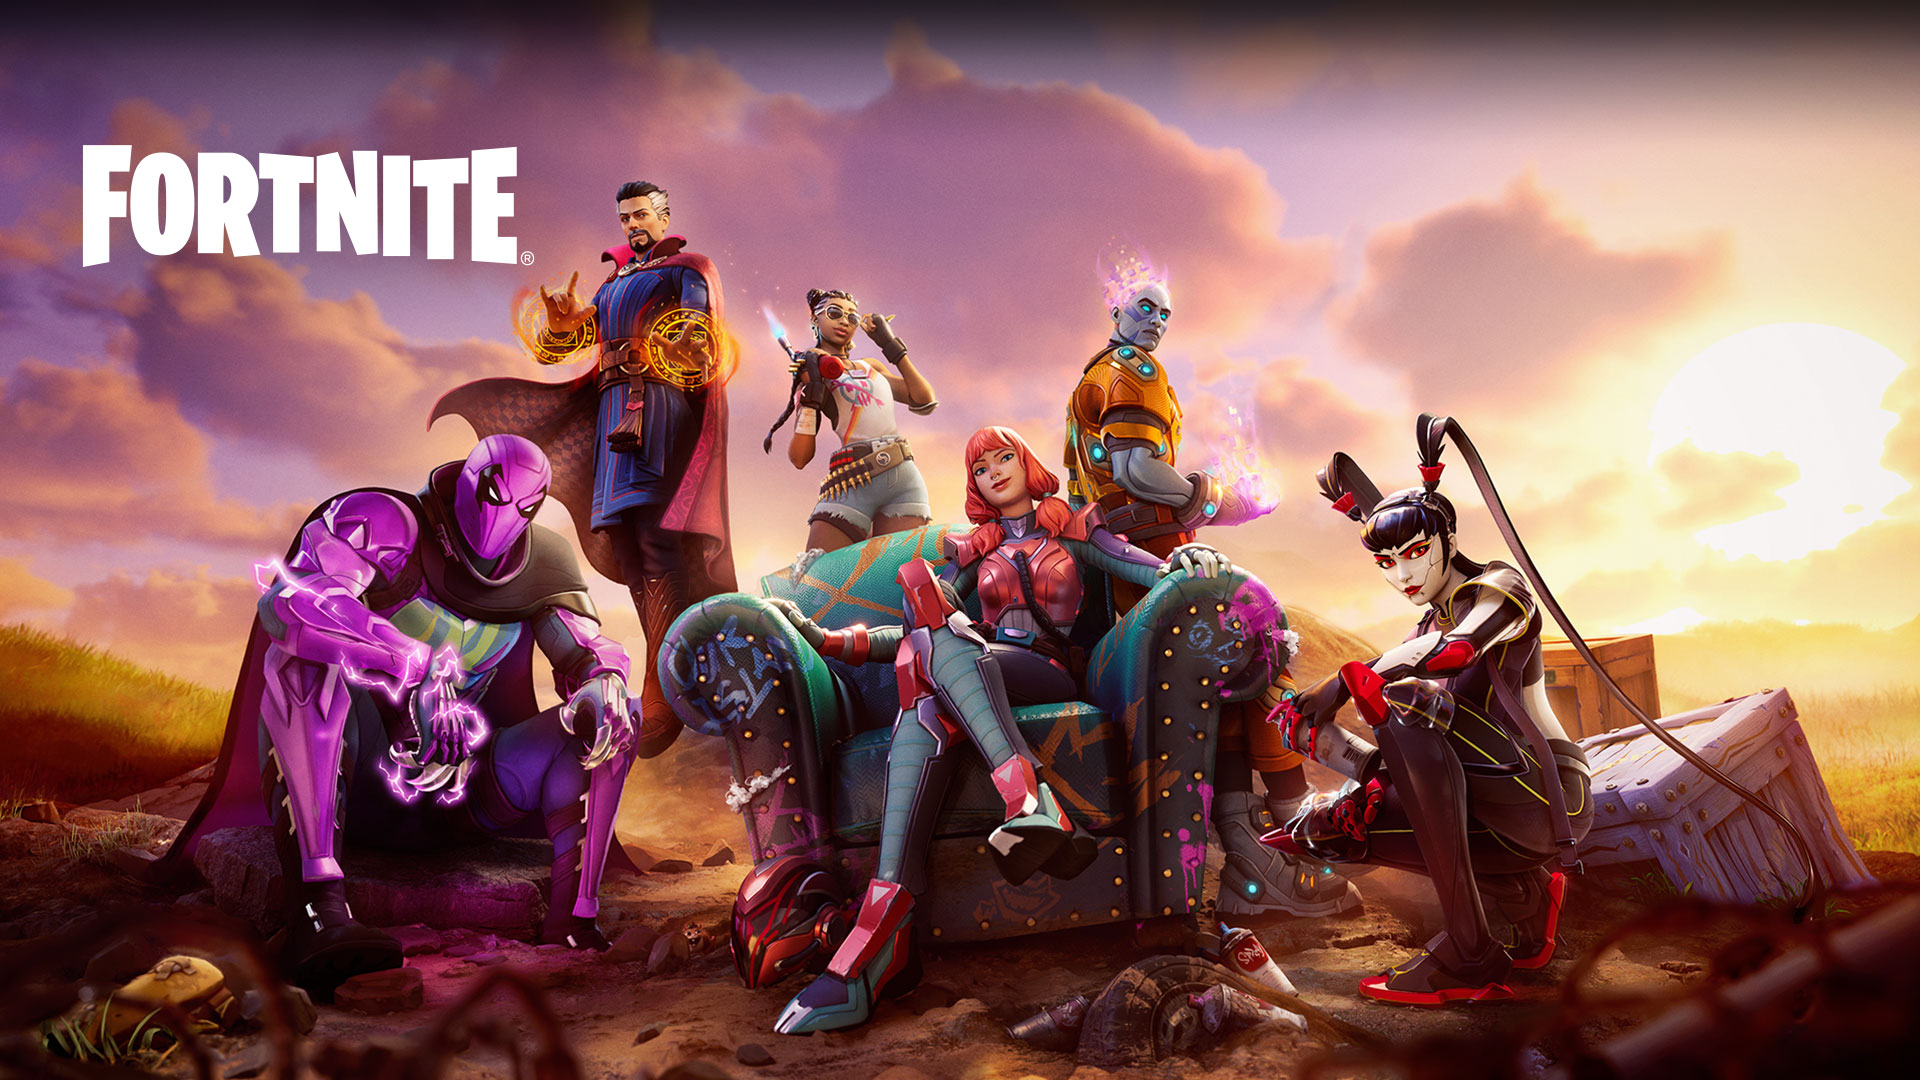 Fortnite, A group of characters, including Doctor Strange, gathers around broken furniture in a field.